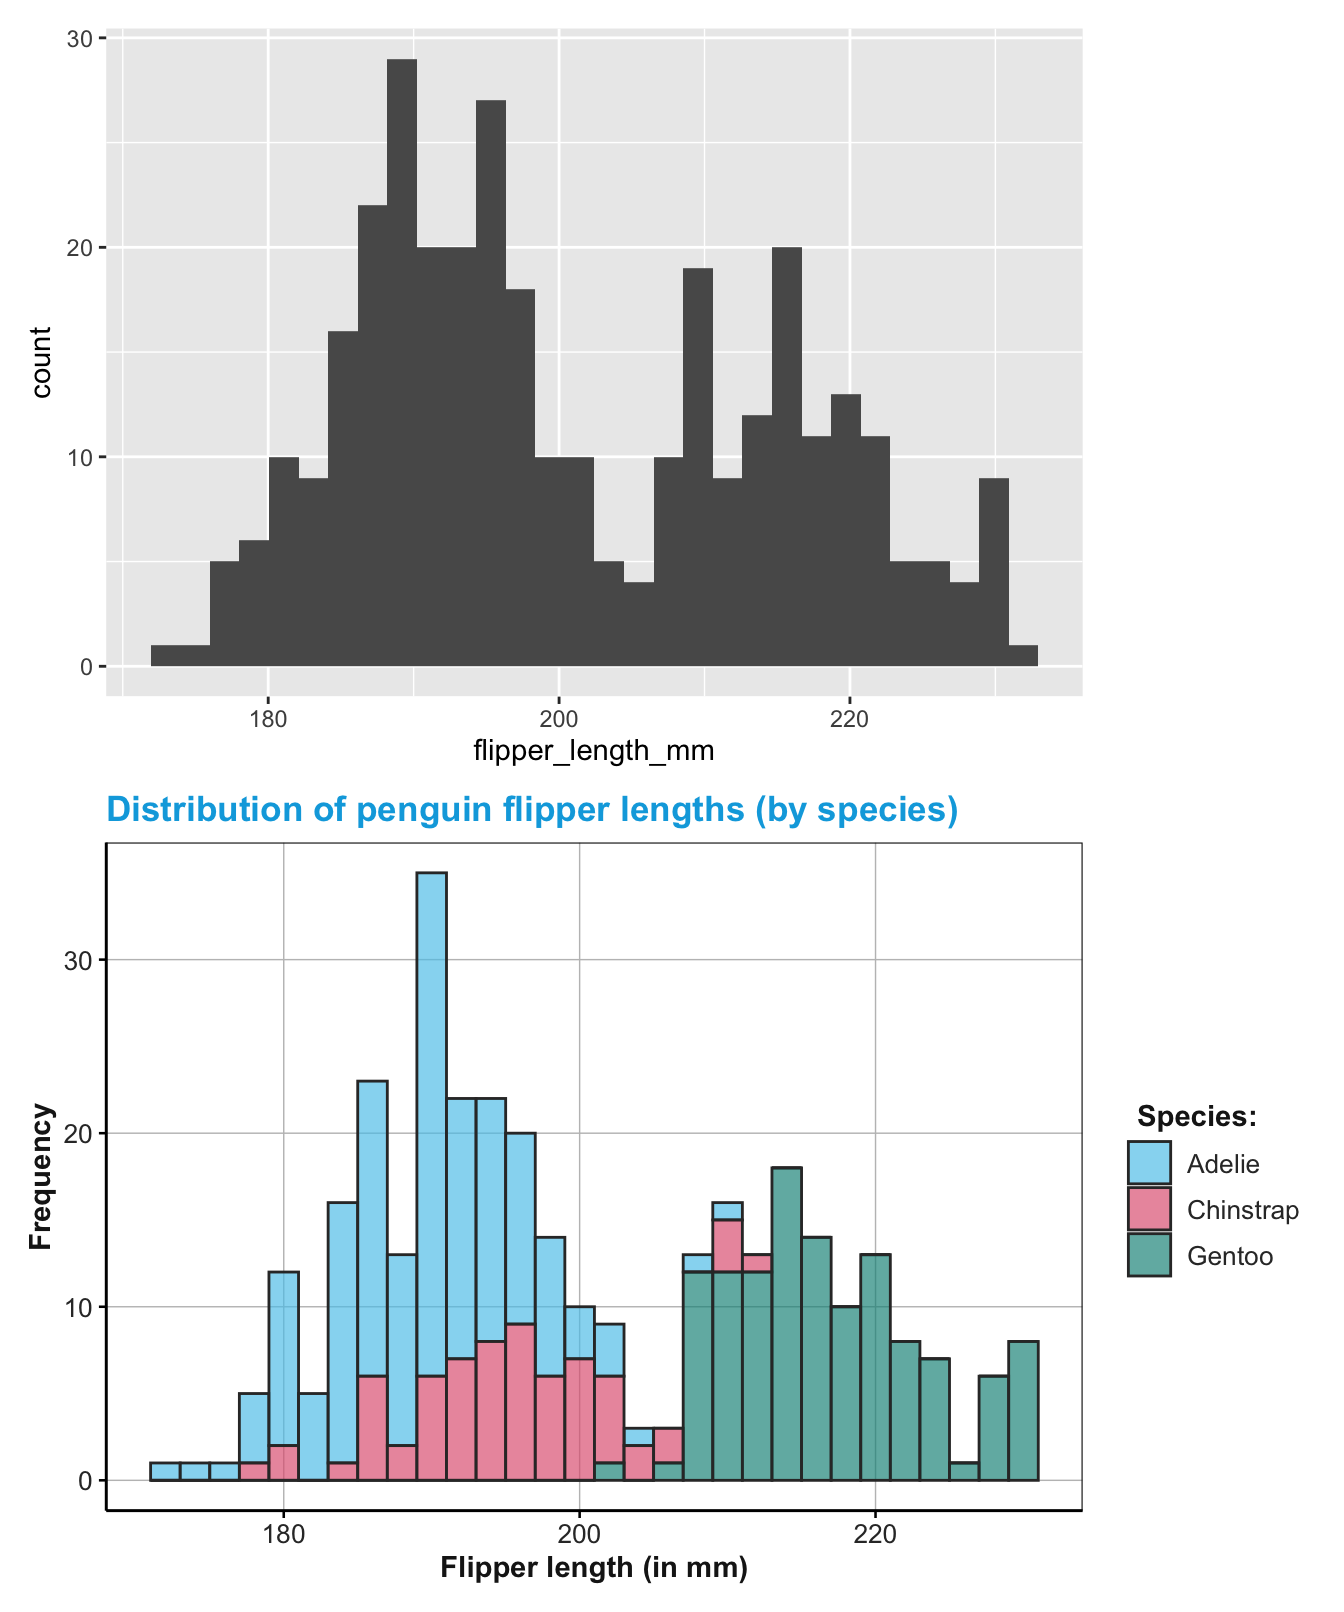 Combining two ggplot2 plots (using the patchwork package).